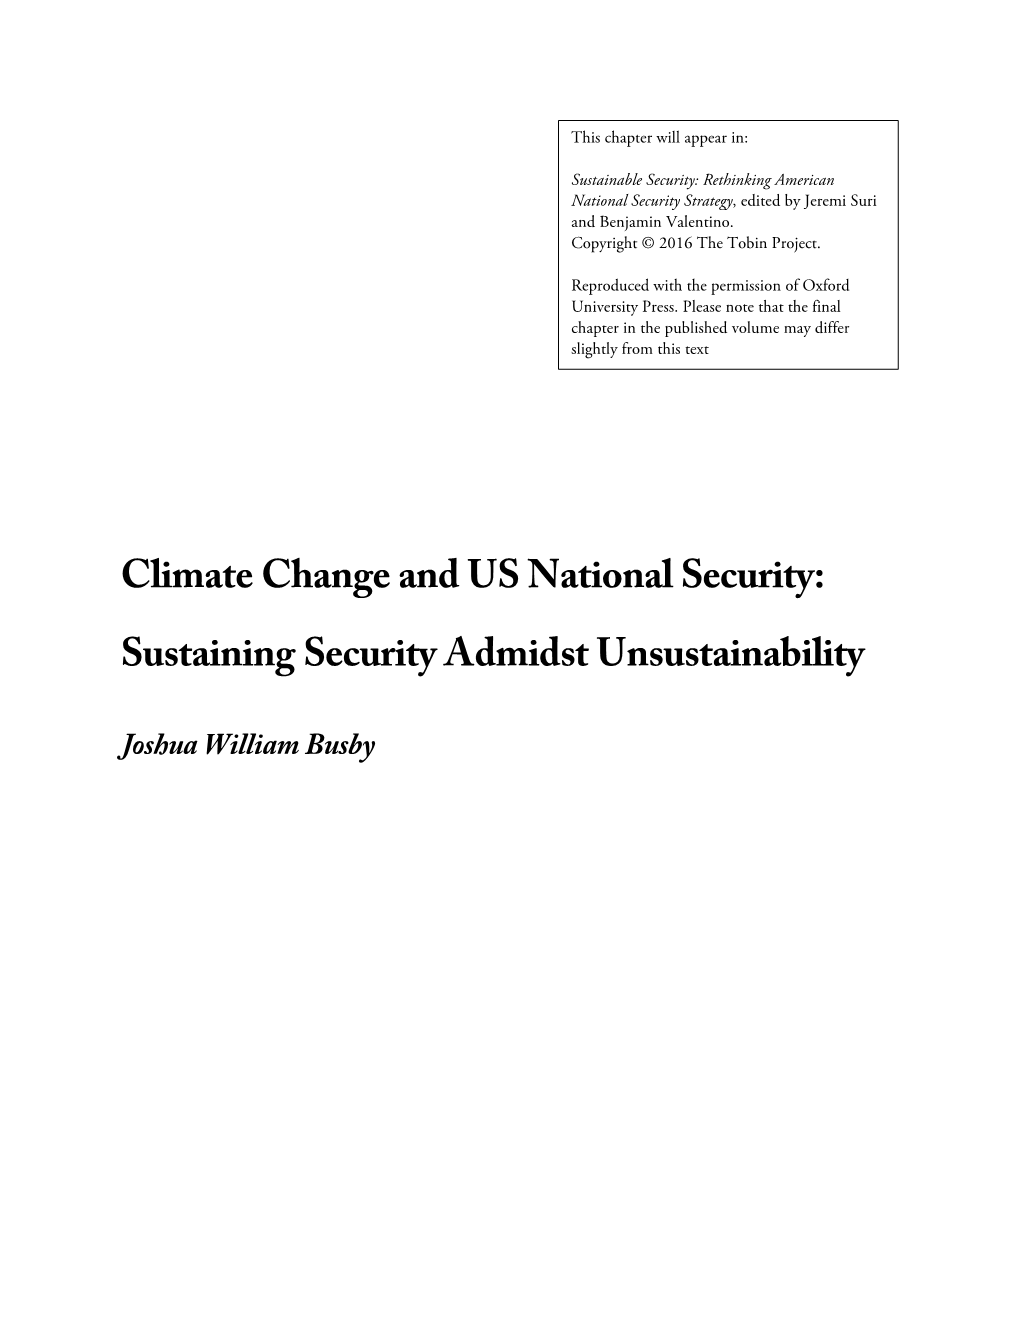 Climate Change and US National Security: Sustaining Security Admidst Unsustainability